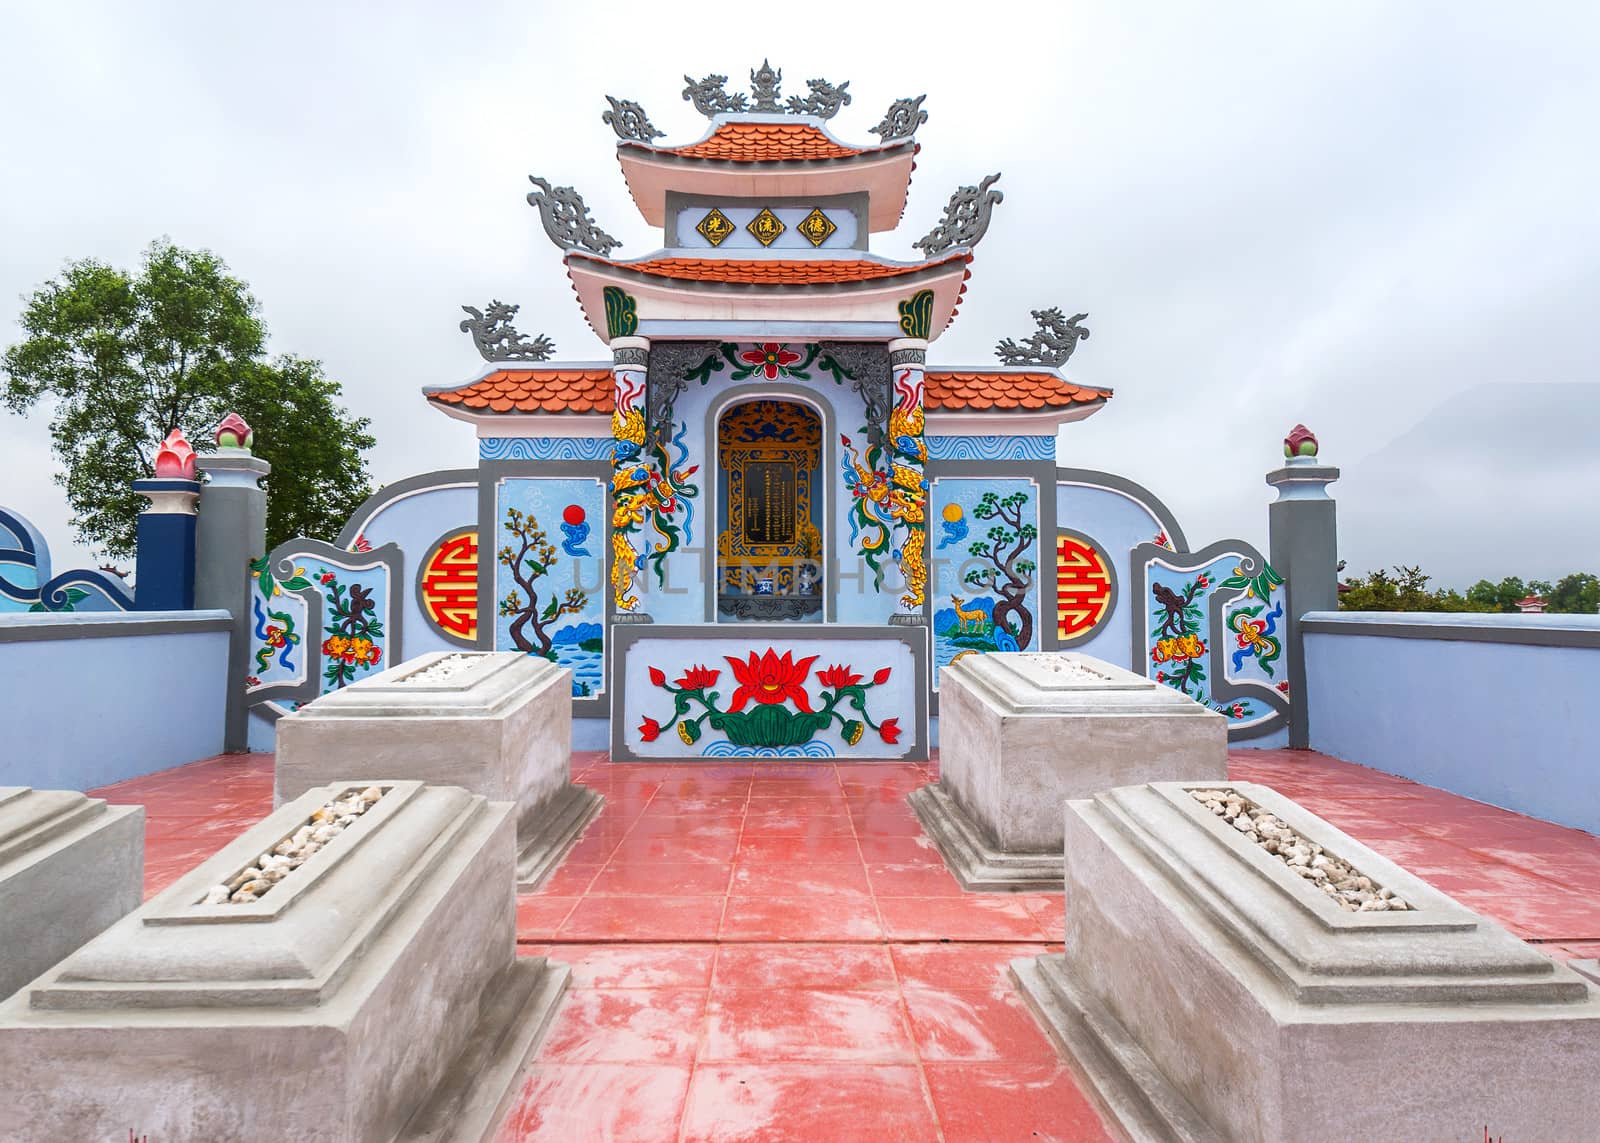 Beautiful paintings, Chinese architecture and neat tombs combine for a quiet setting.